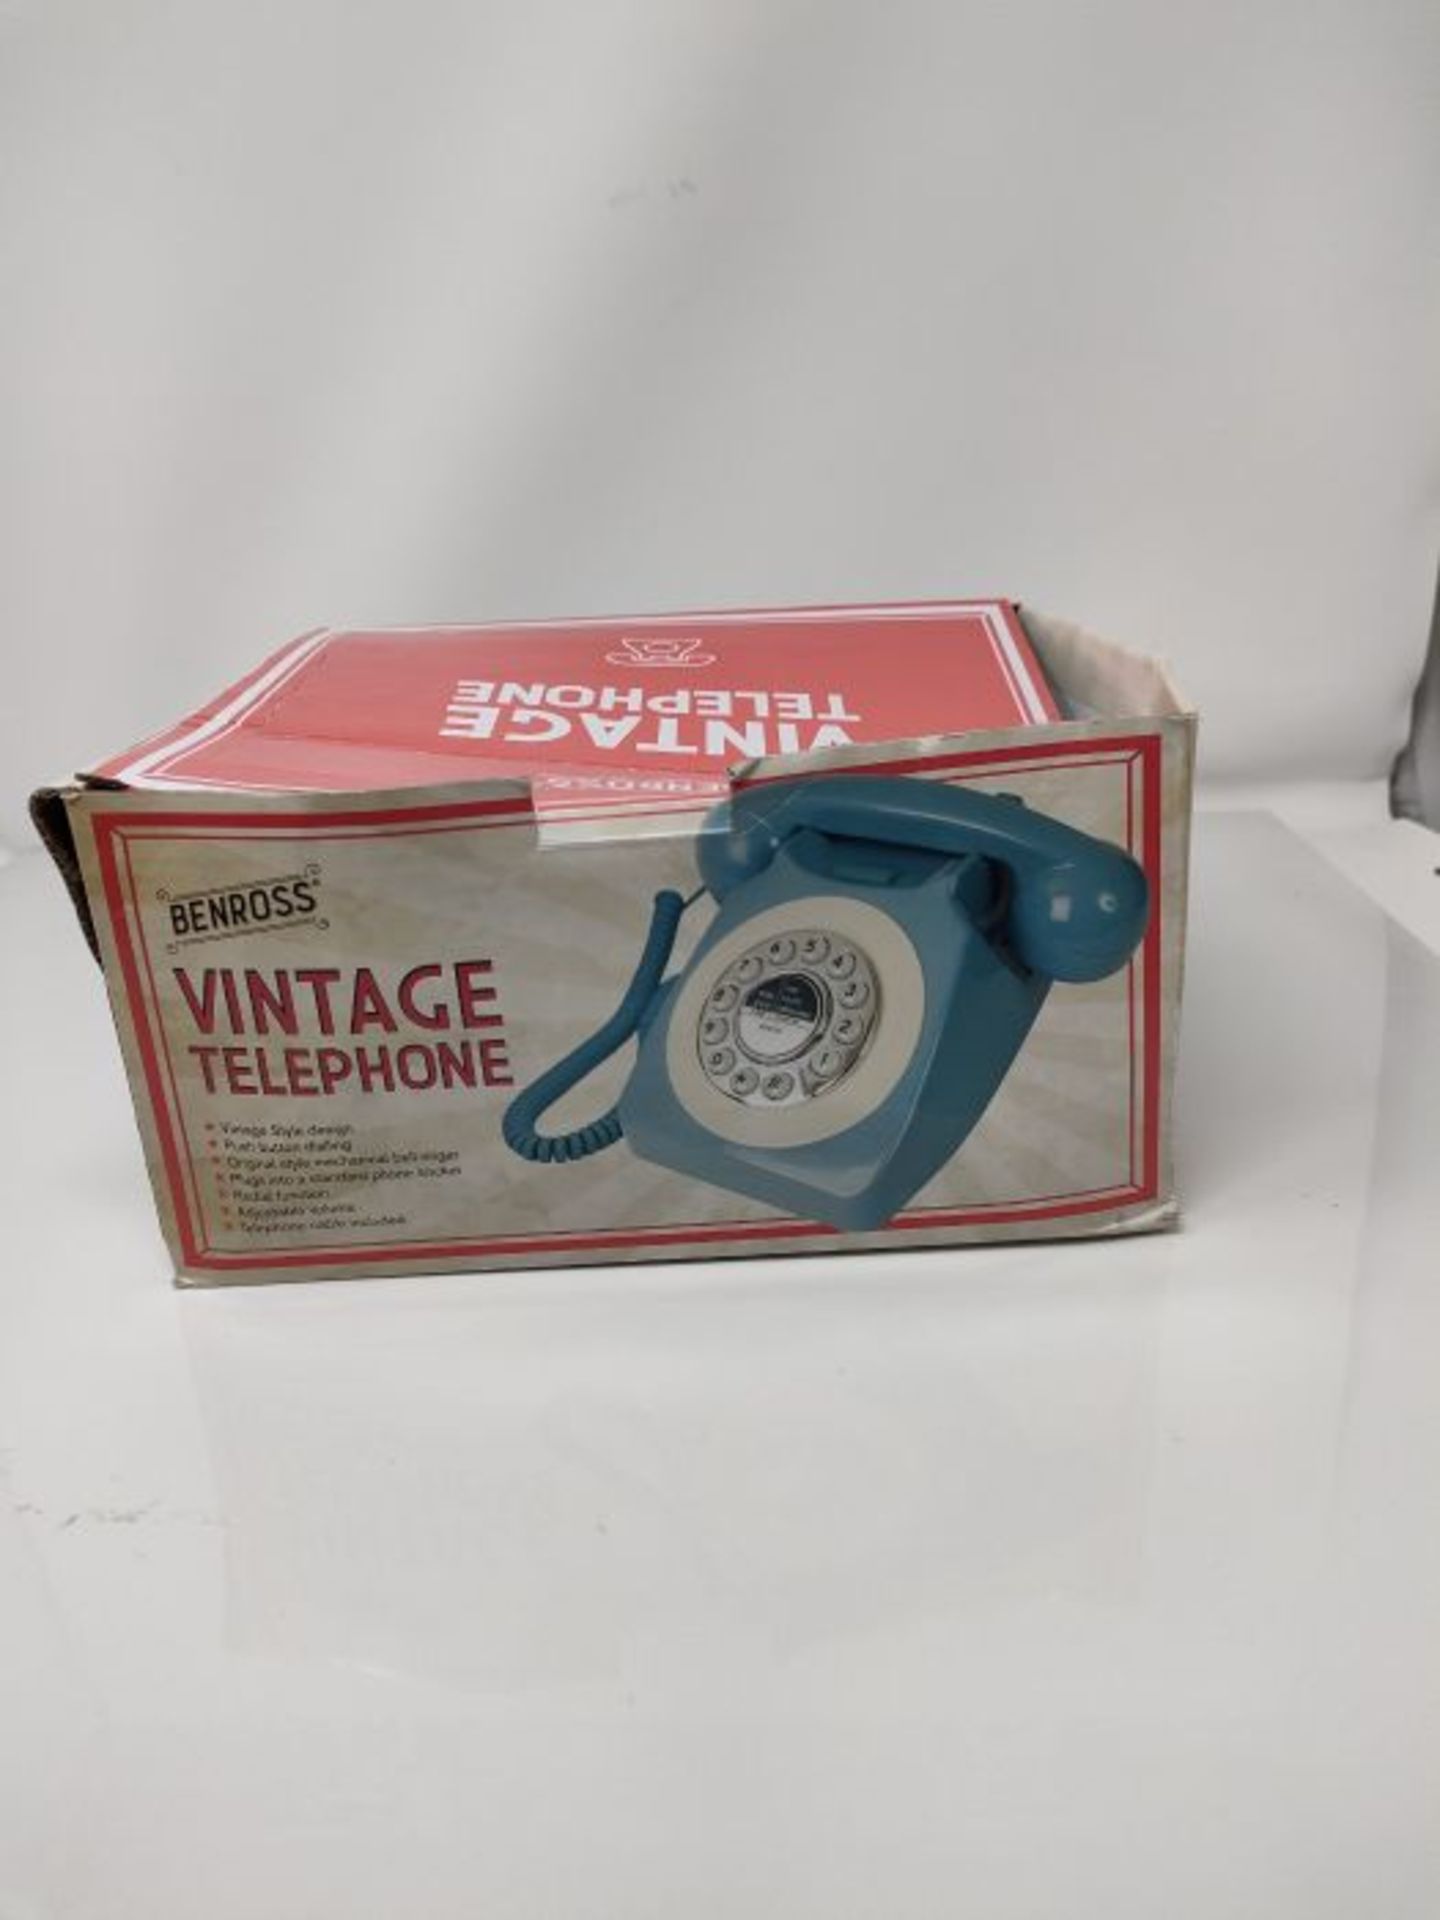 Benross 44540 Classic Retro Vintage Style Home Telephone - Blue - Image 2 of 3